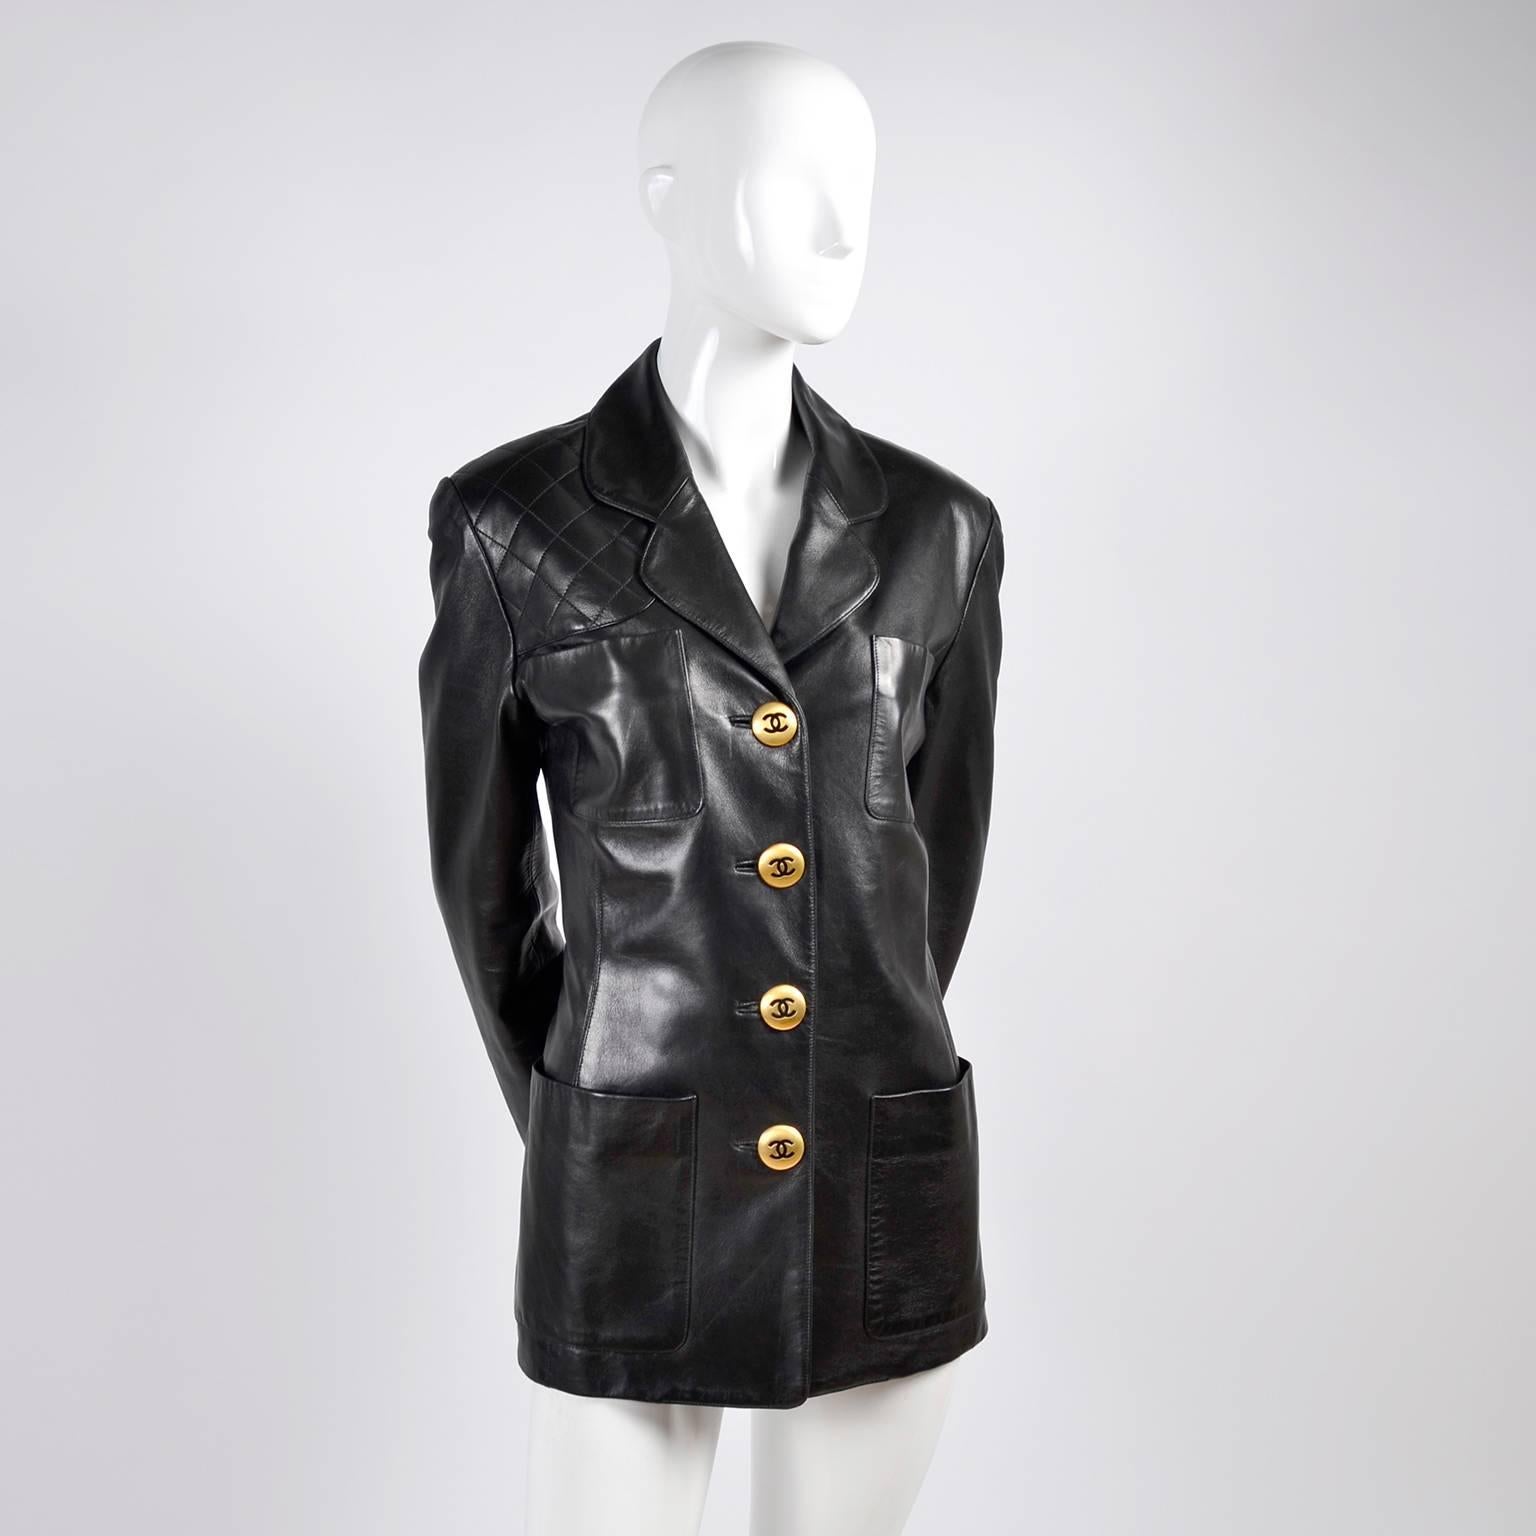 This vintage Chanel black leather jacket has beautiful large brass CC logo buttons and front pockets. The jacket is a timeless classic and can be worn in so many different ways! This leather Chanel blazer is lined in silk CC logo lining, and we have